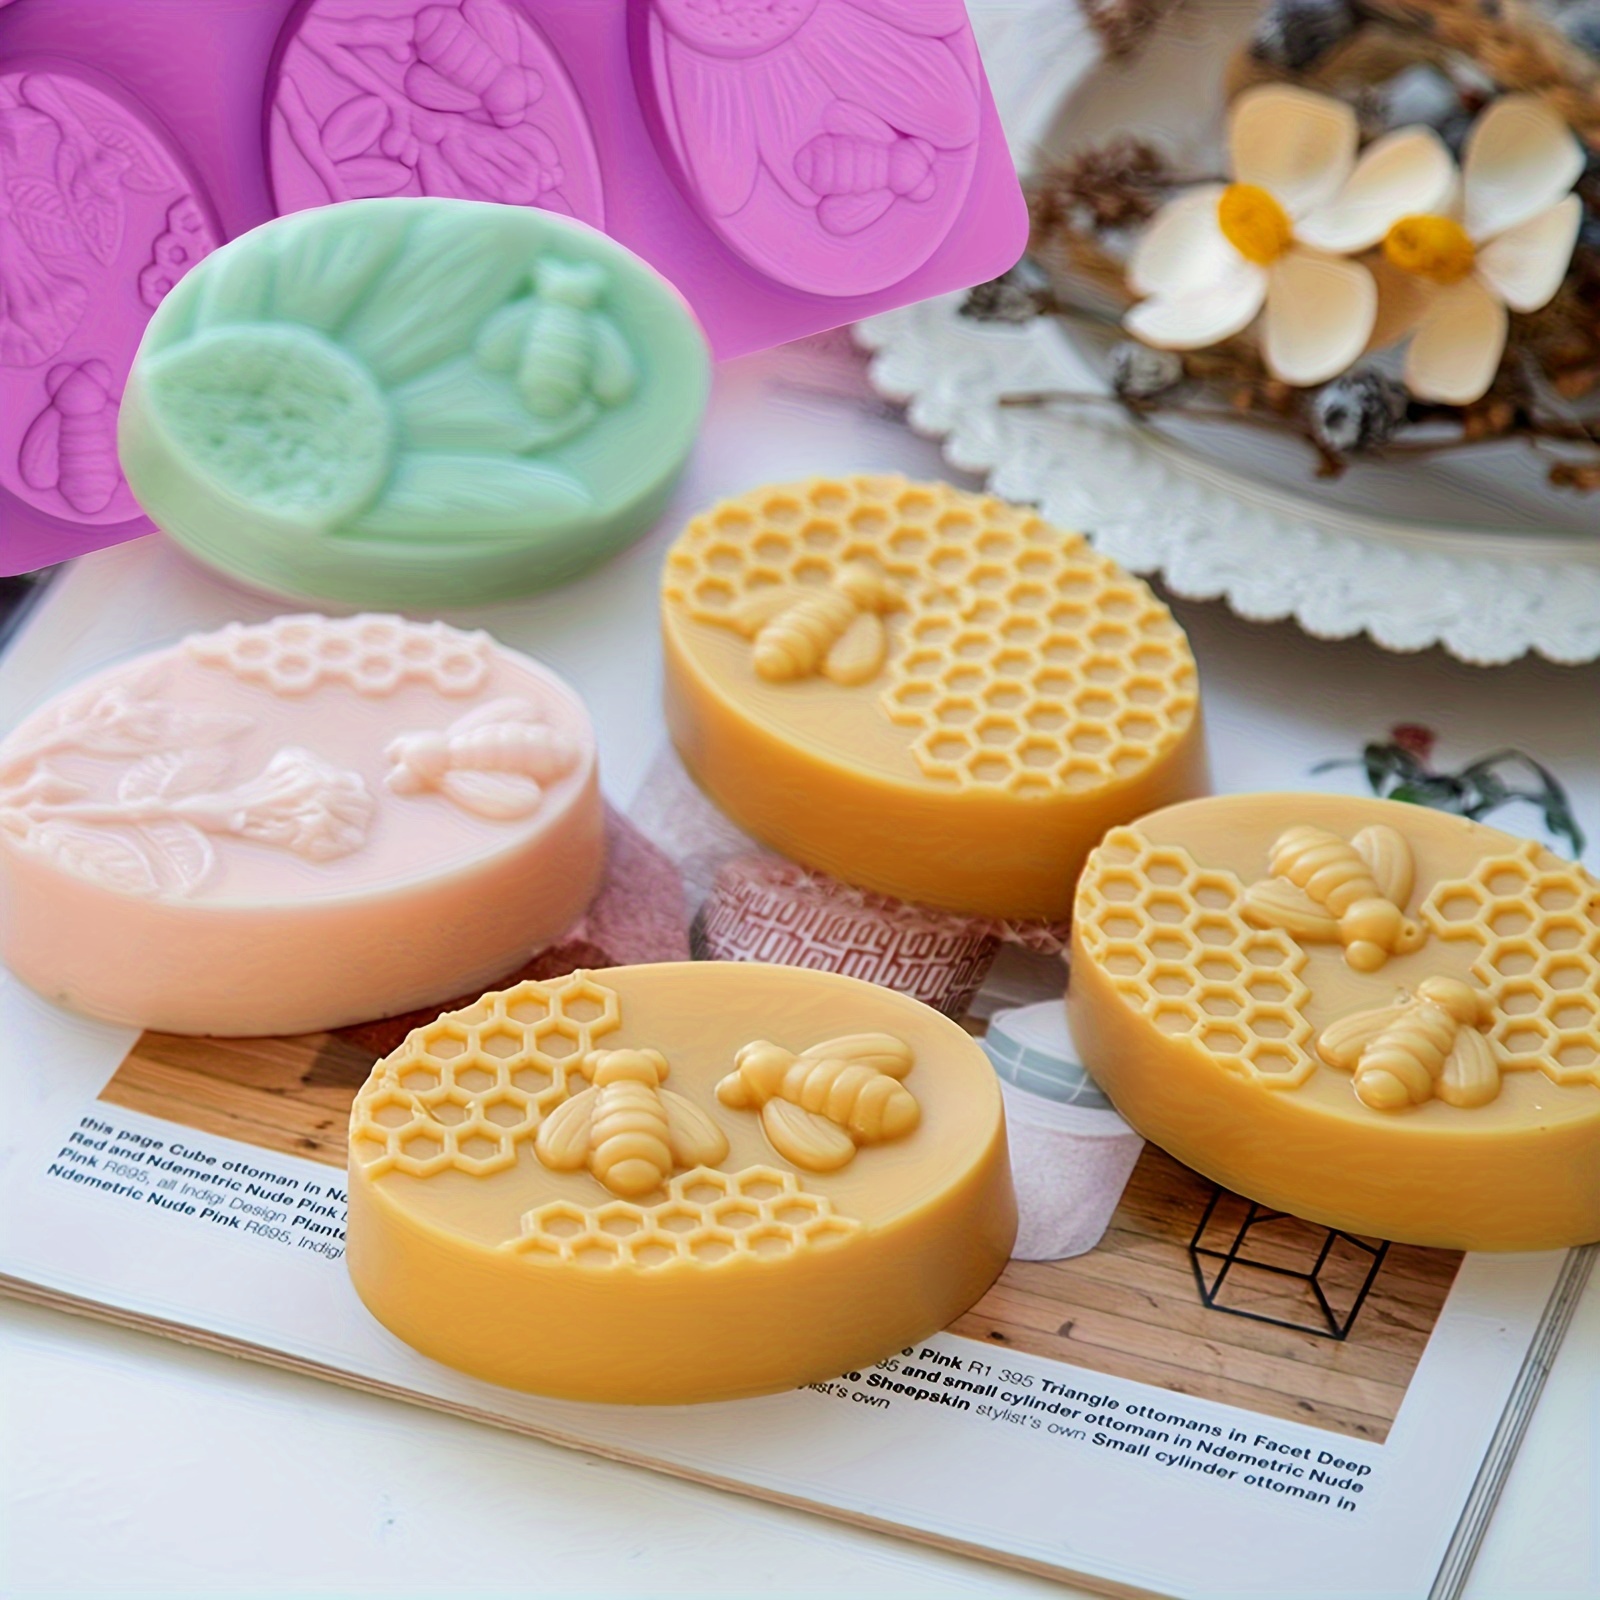 Small Honeycomb Silicone Mold